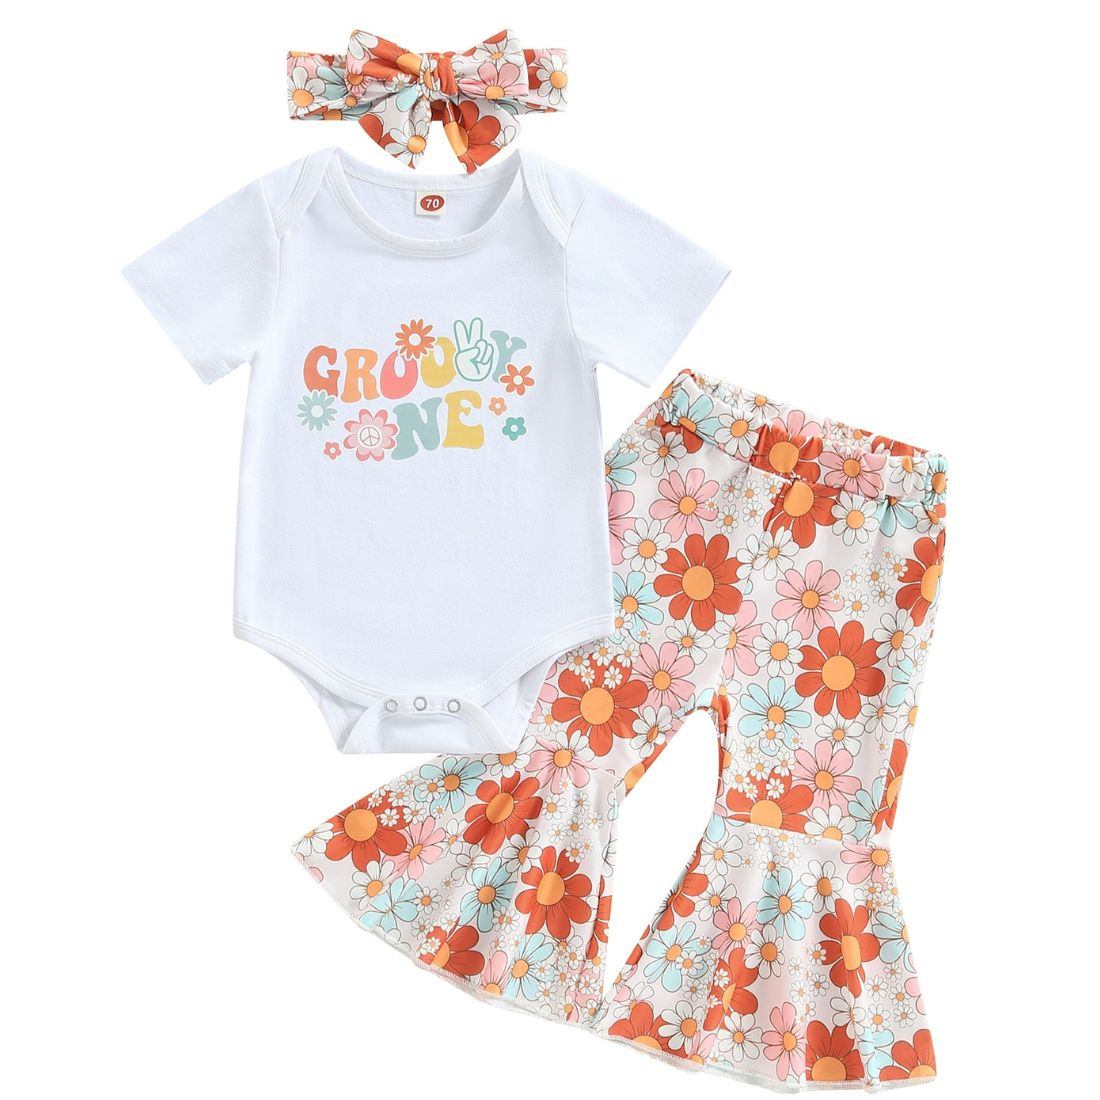 Baby Girl Short Sleeve Groovy One Bodysuit Clothing Set - MyTy | Buy on-trend and stylish Baby and Toddler Clothing Sets @ My Trendy Youngsters - Dress your little one in Style @ My Trendy Youngsters 